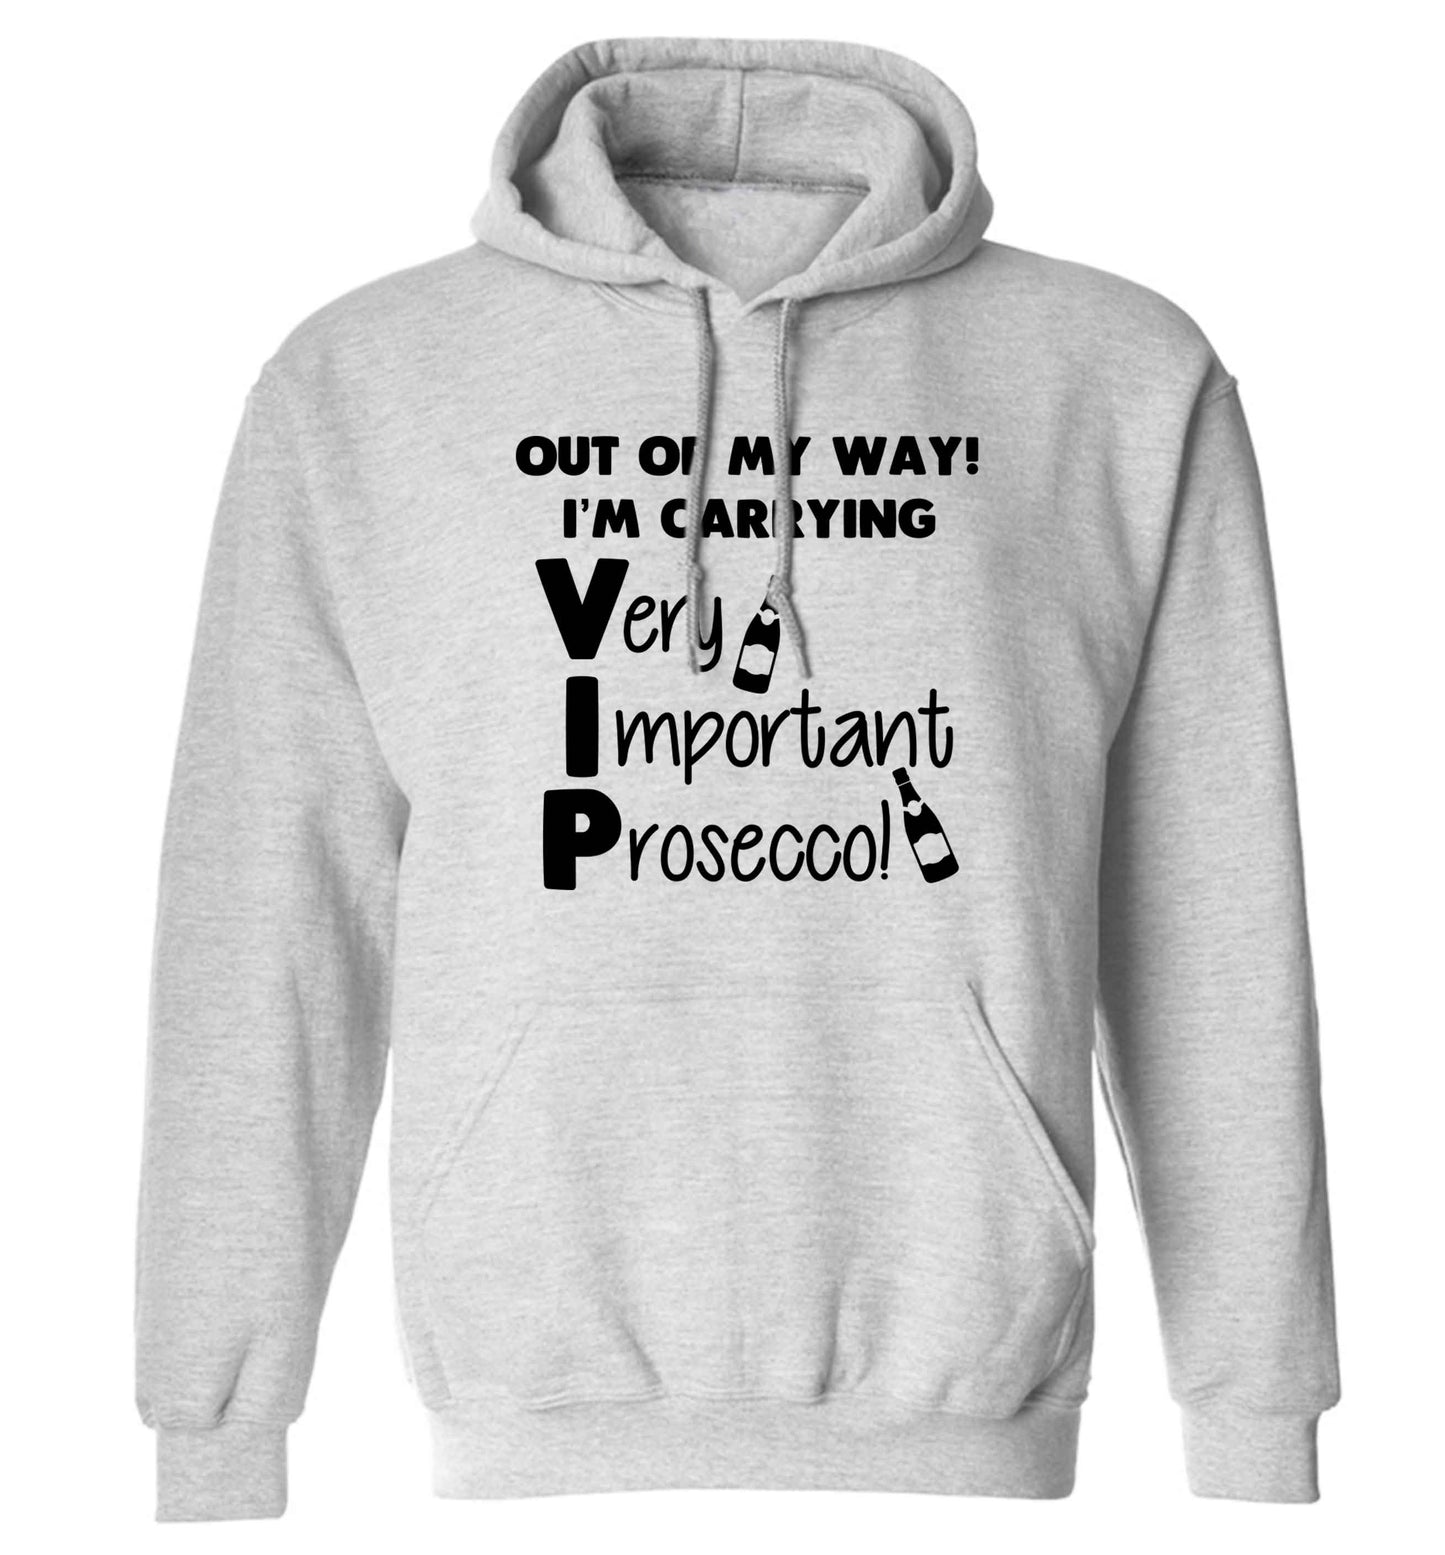 Out of my way I'm carrying very important prosecco! adults unisex grey hoodie 2XL